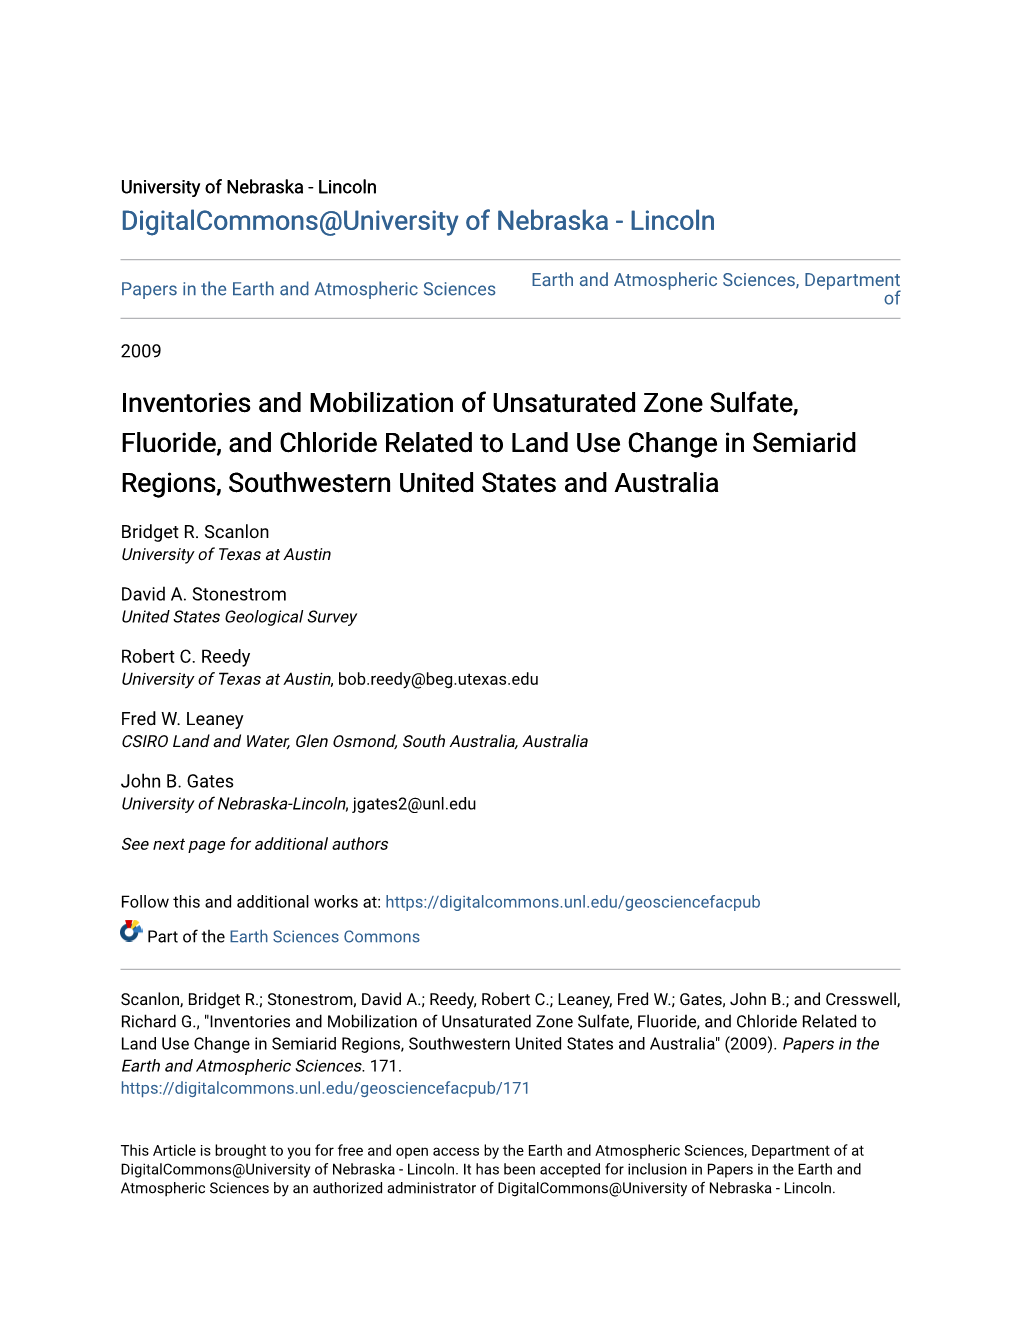 Inventories and Mobilization of Unsaturated Zone Sulfate, Fluoride